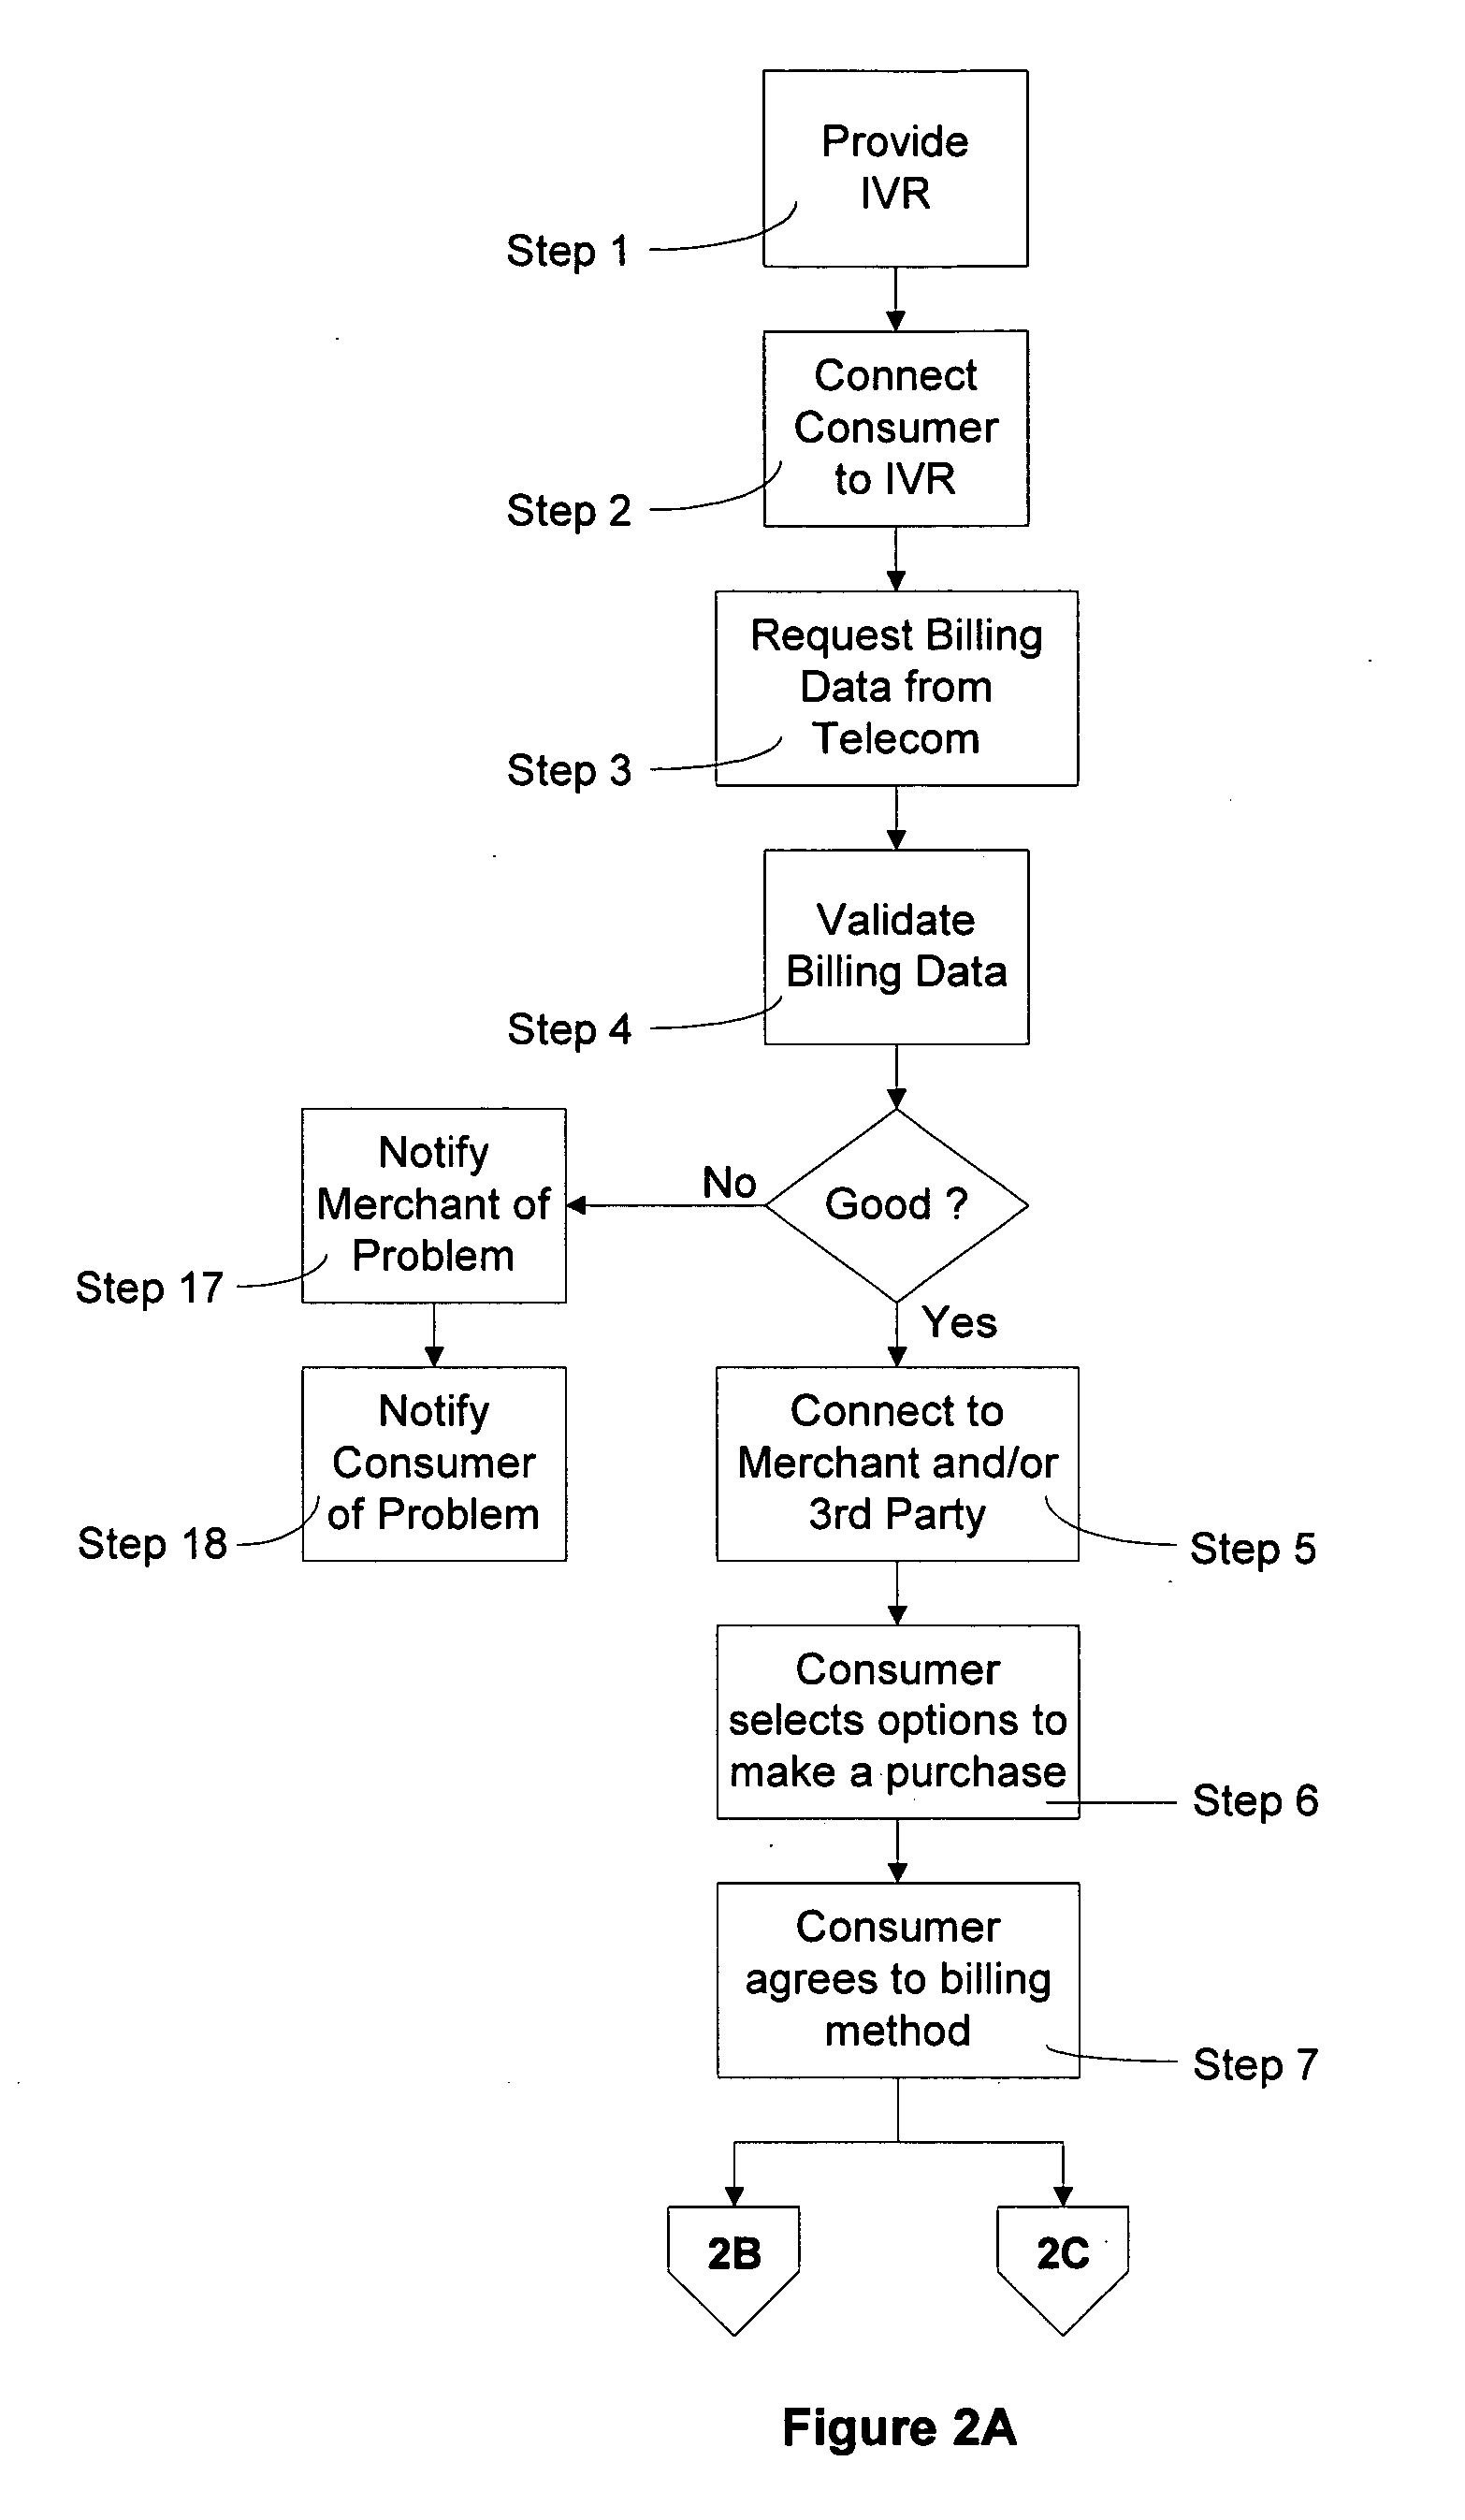 Systems and methods for purchasing goods and collecting donations